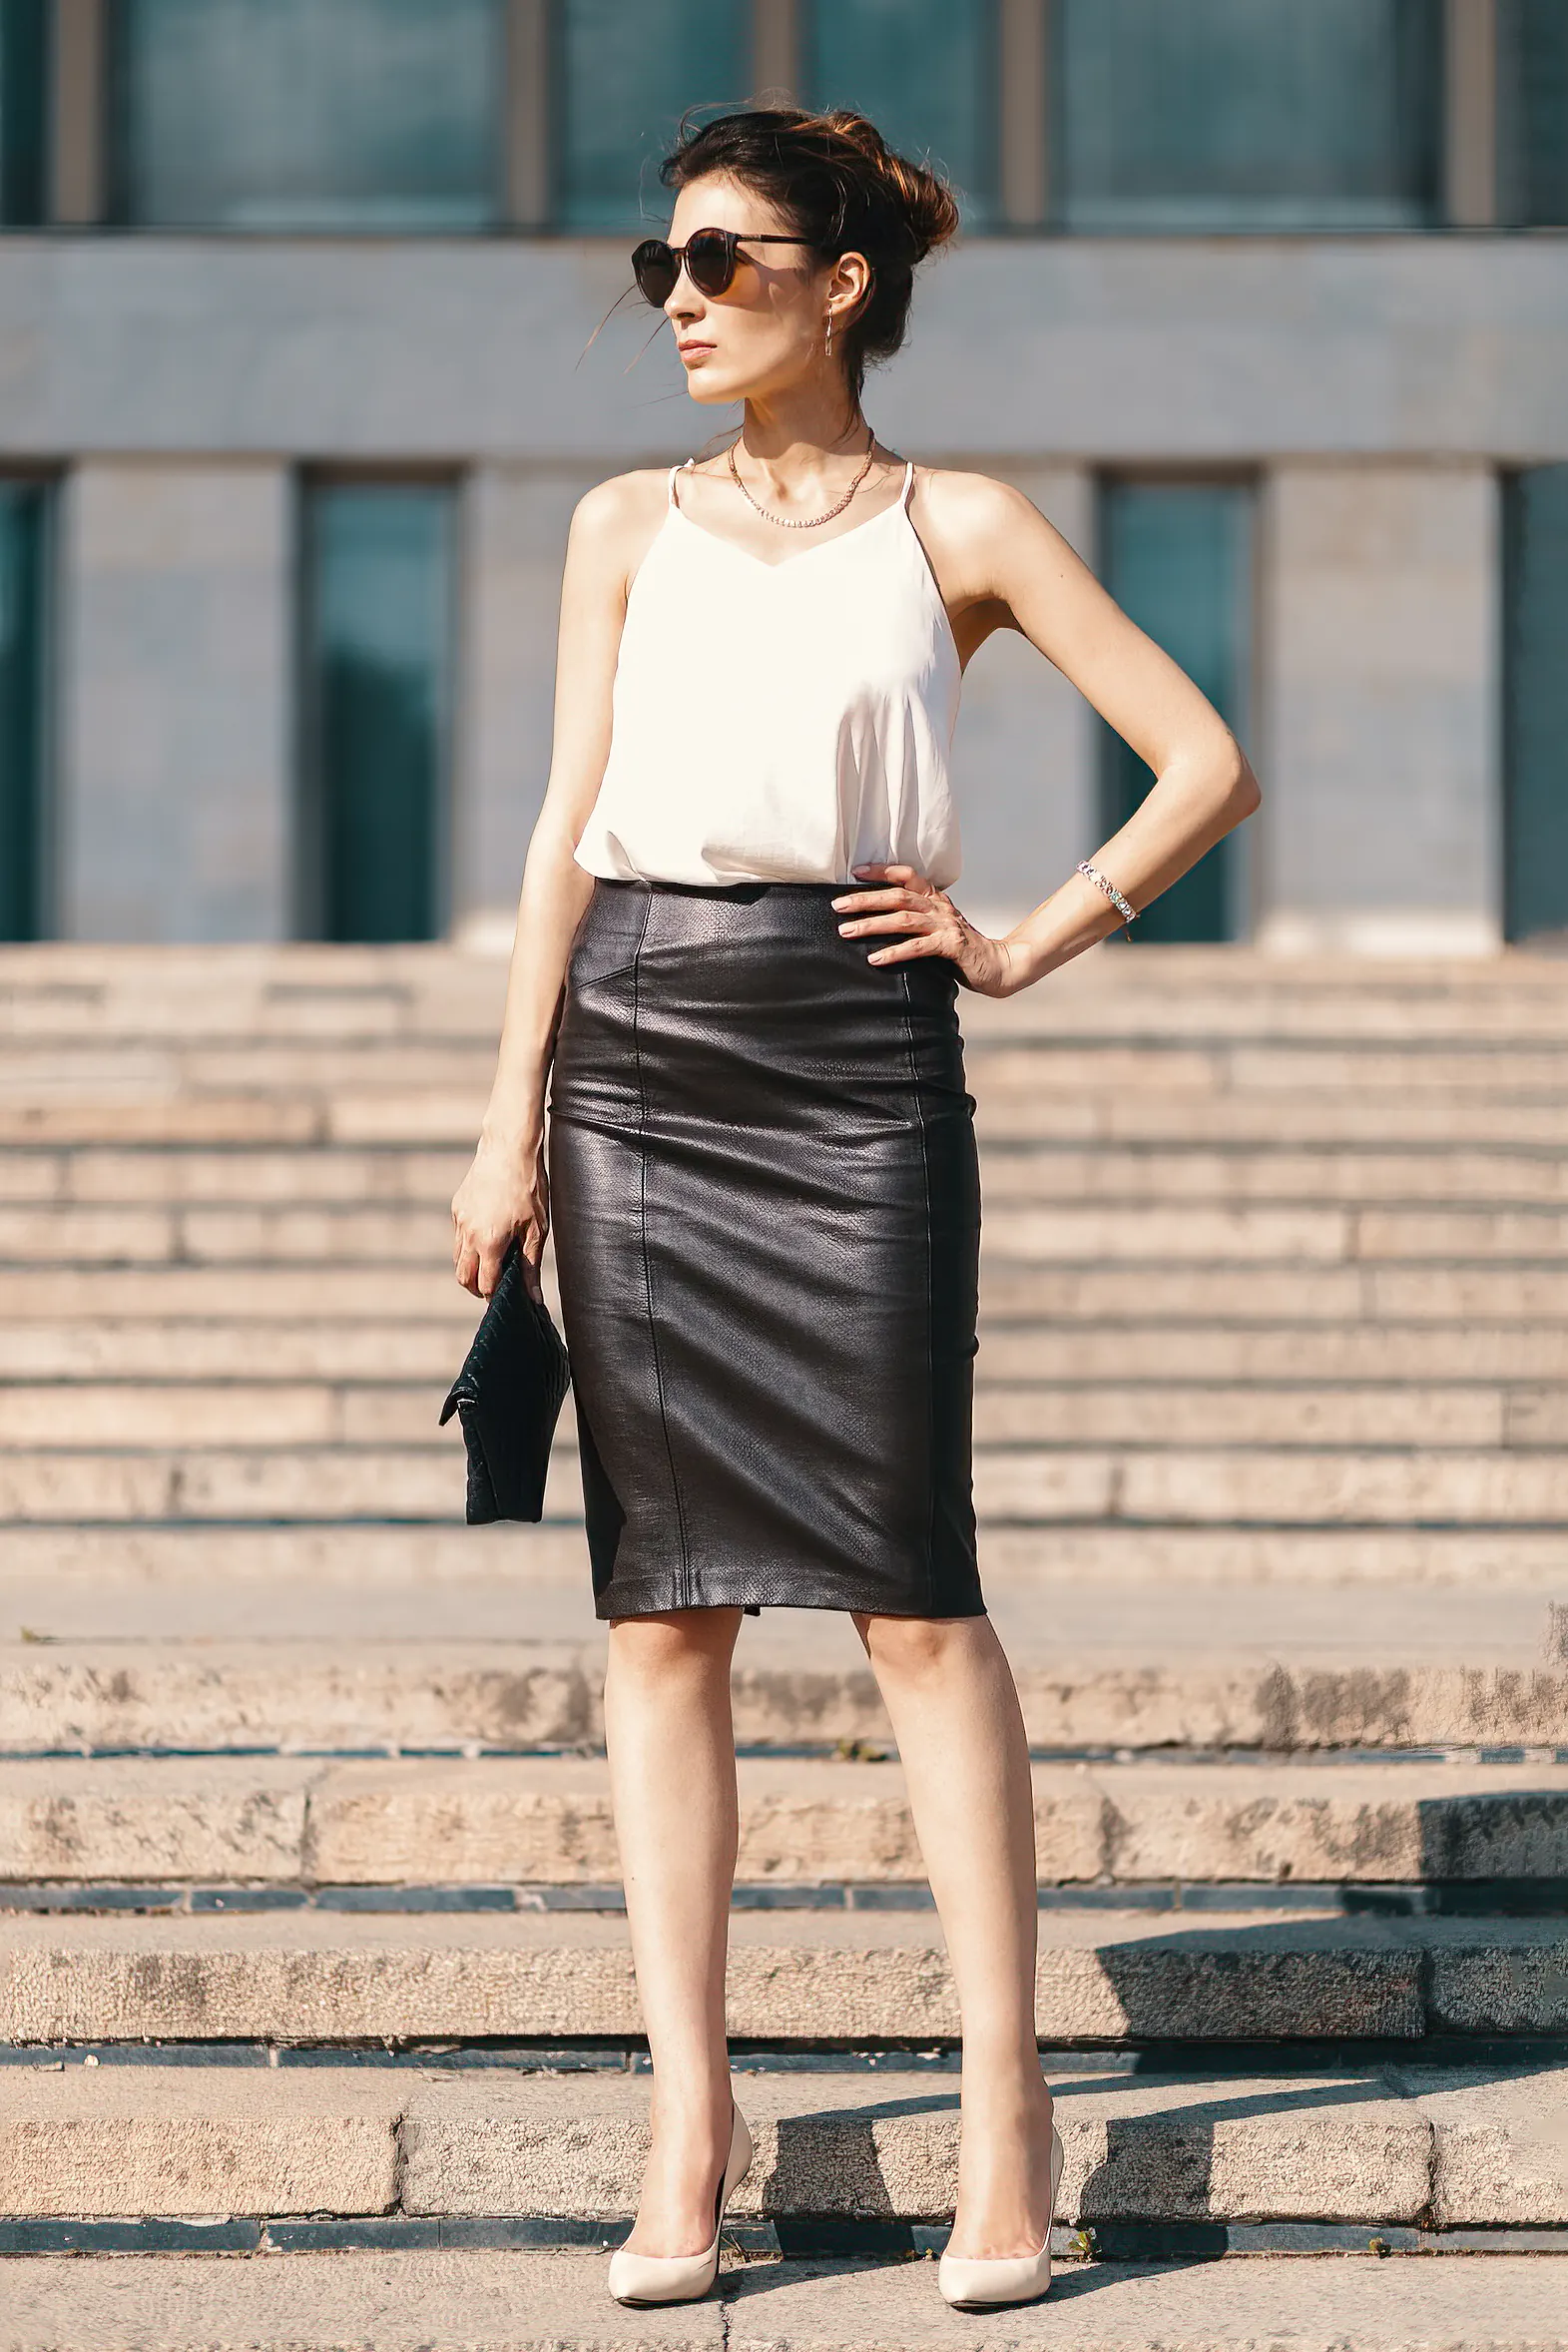 Fashionable brunette businesswoman at stair wearing black leather pencil skirt